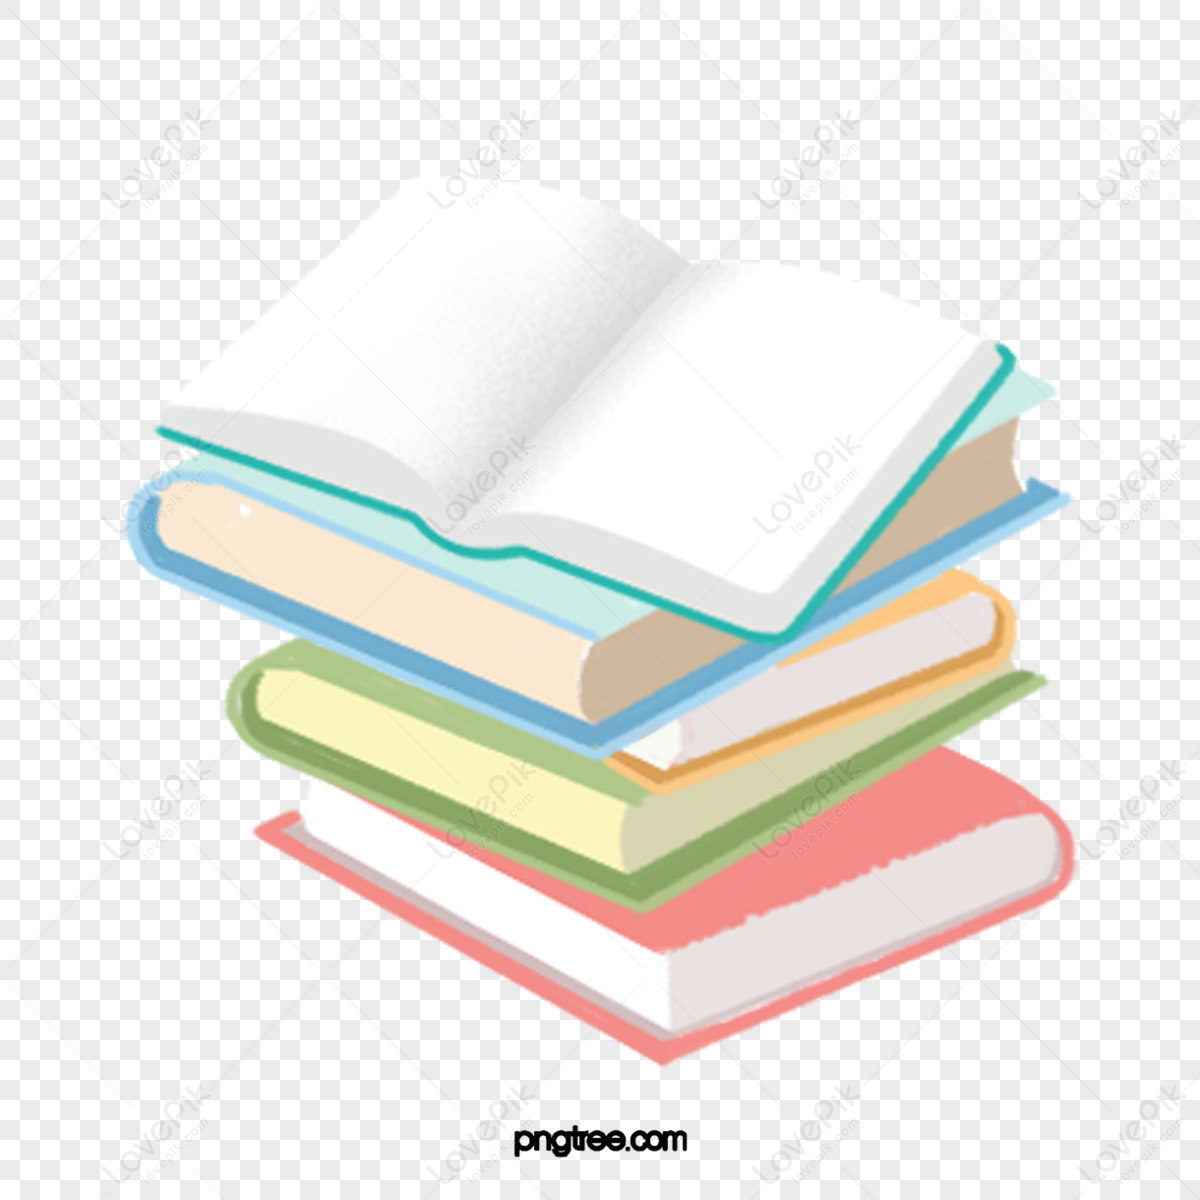 a stack of books to study and review books,stacking,knowledge png hd transparent image